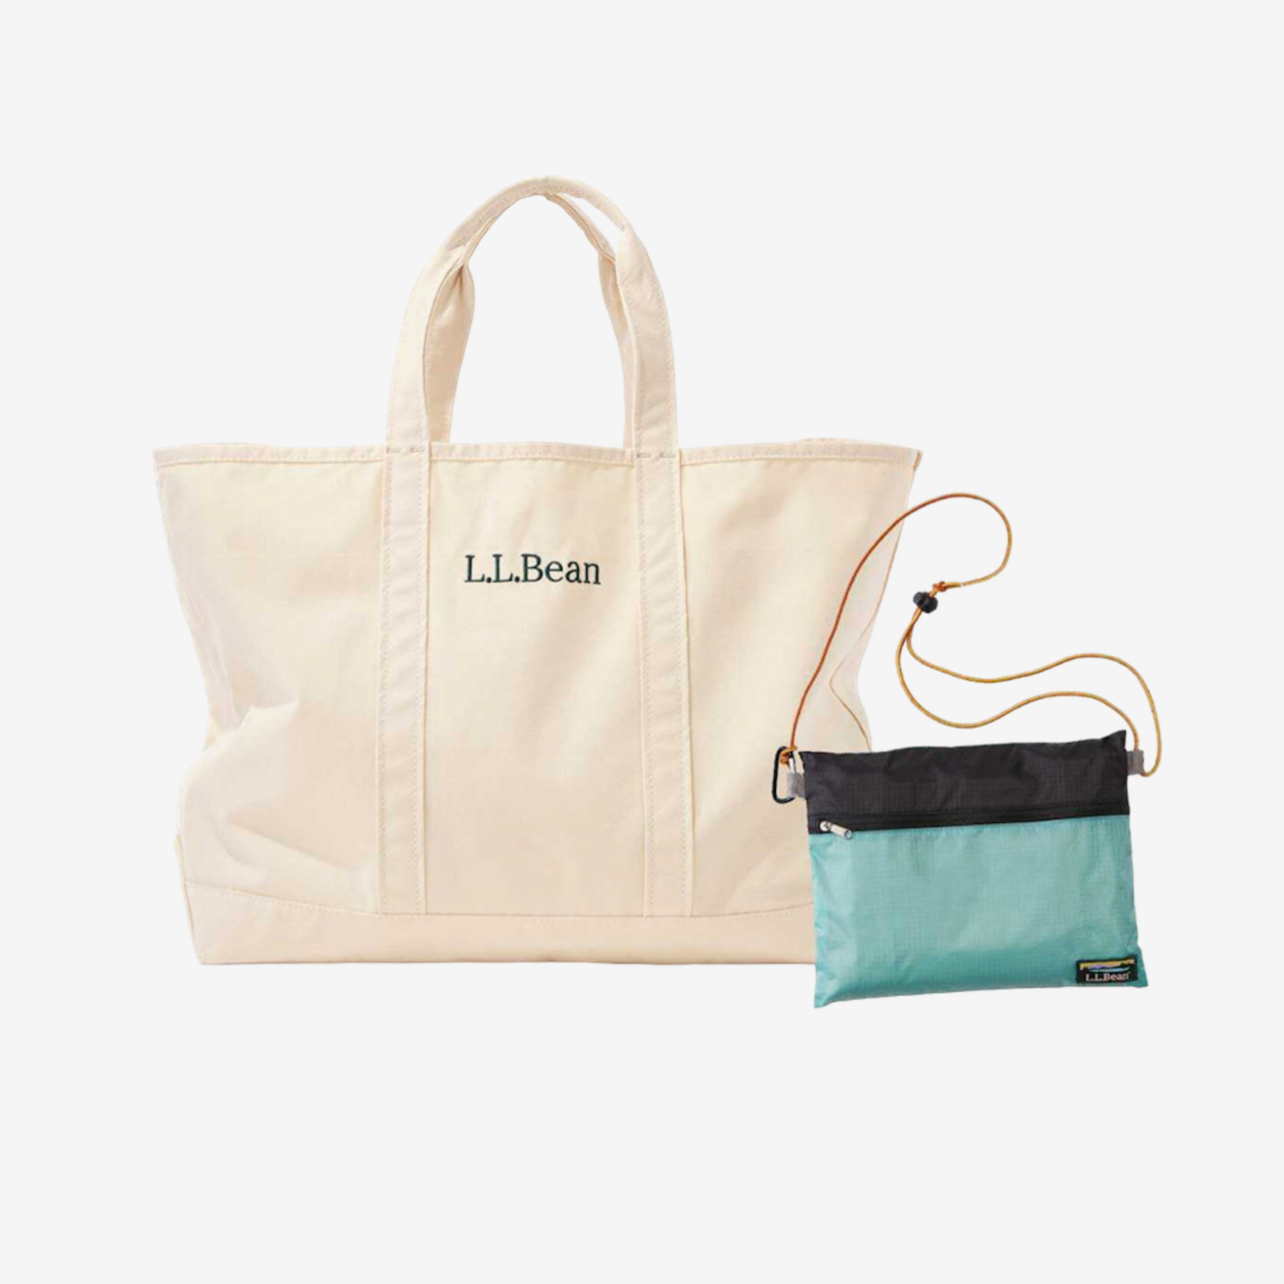 L.L Bean / Grocery tote with pouch